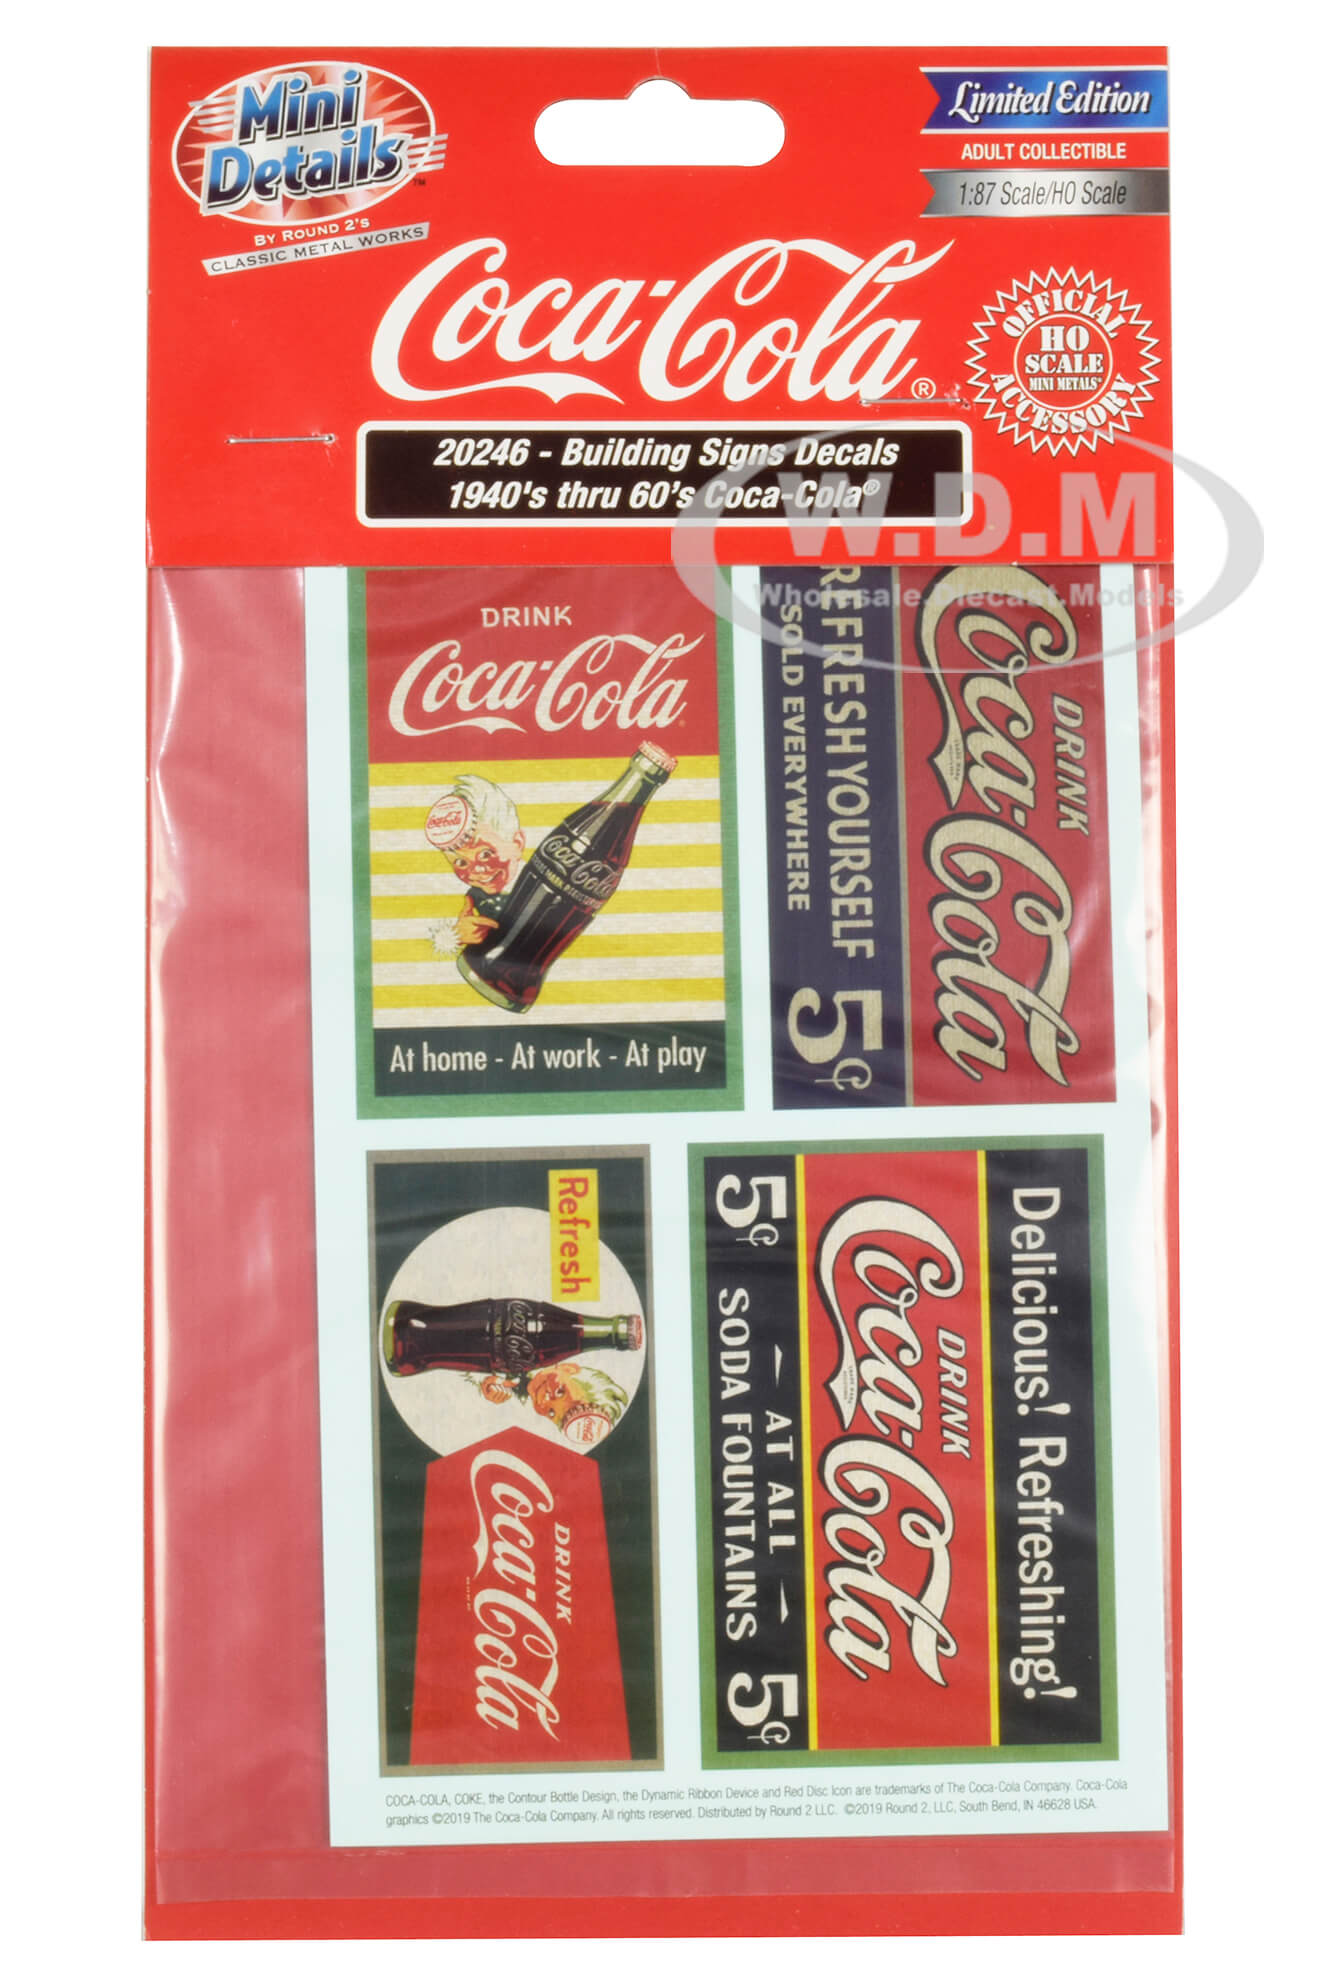 1940s Thru 60s "Coca-Cola" Building Signs Decals for 1/87 (HO) Scale Models by Classic Metal Works